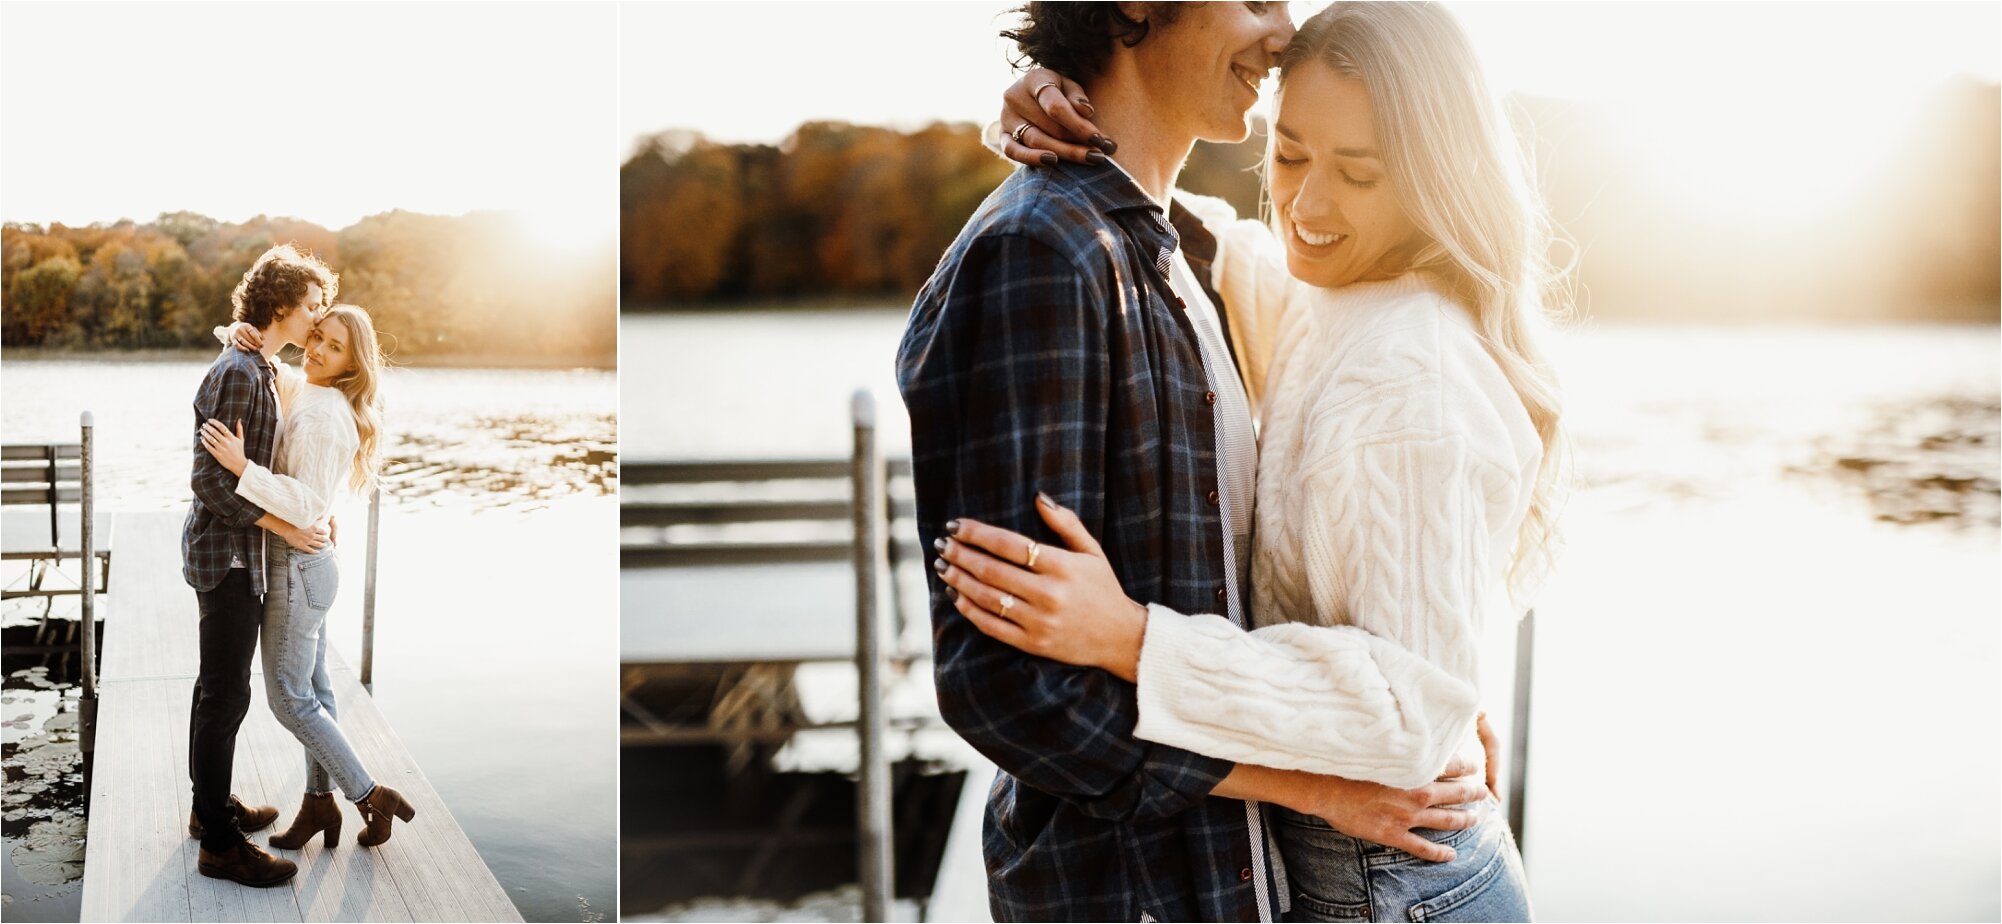  engagement photography pictures session engaged couple outfit ideas dock state park 